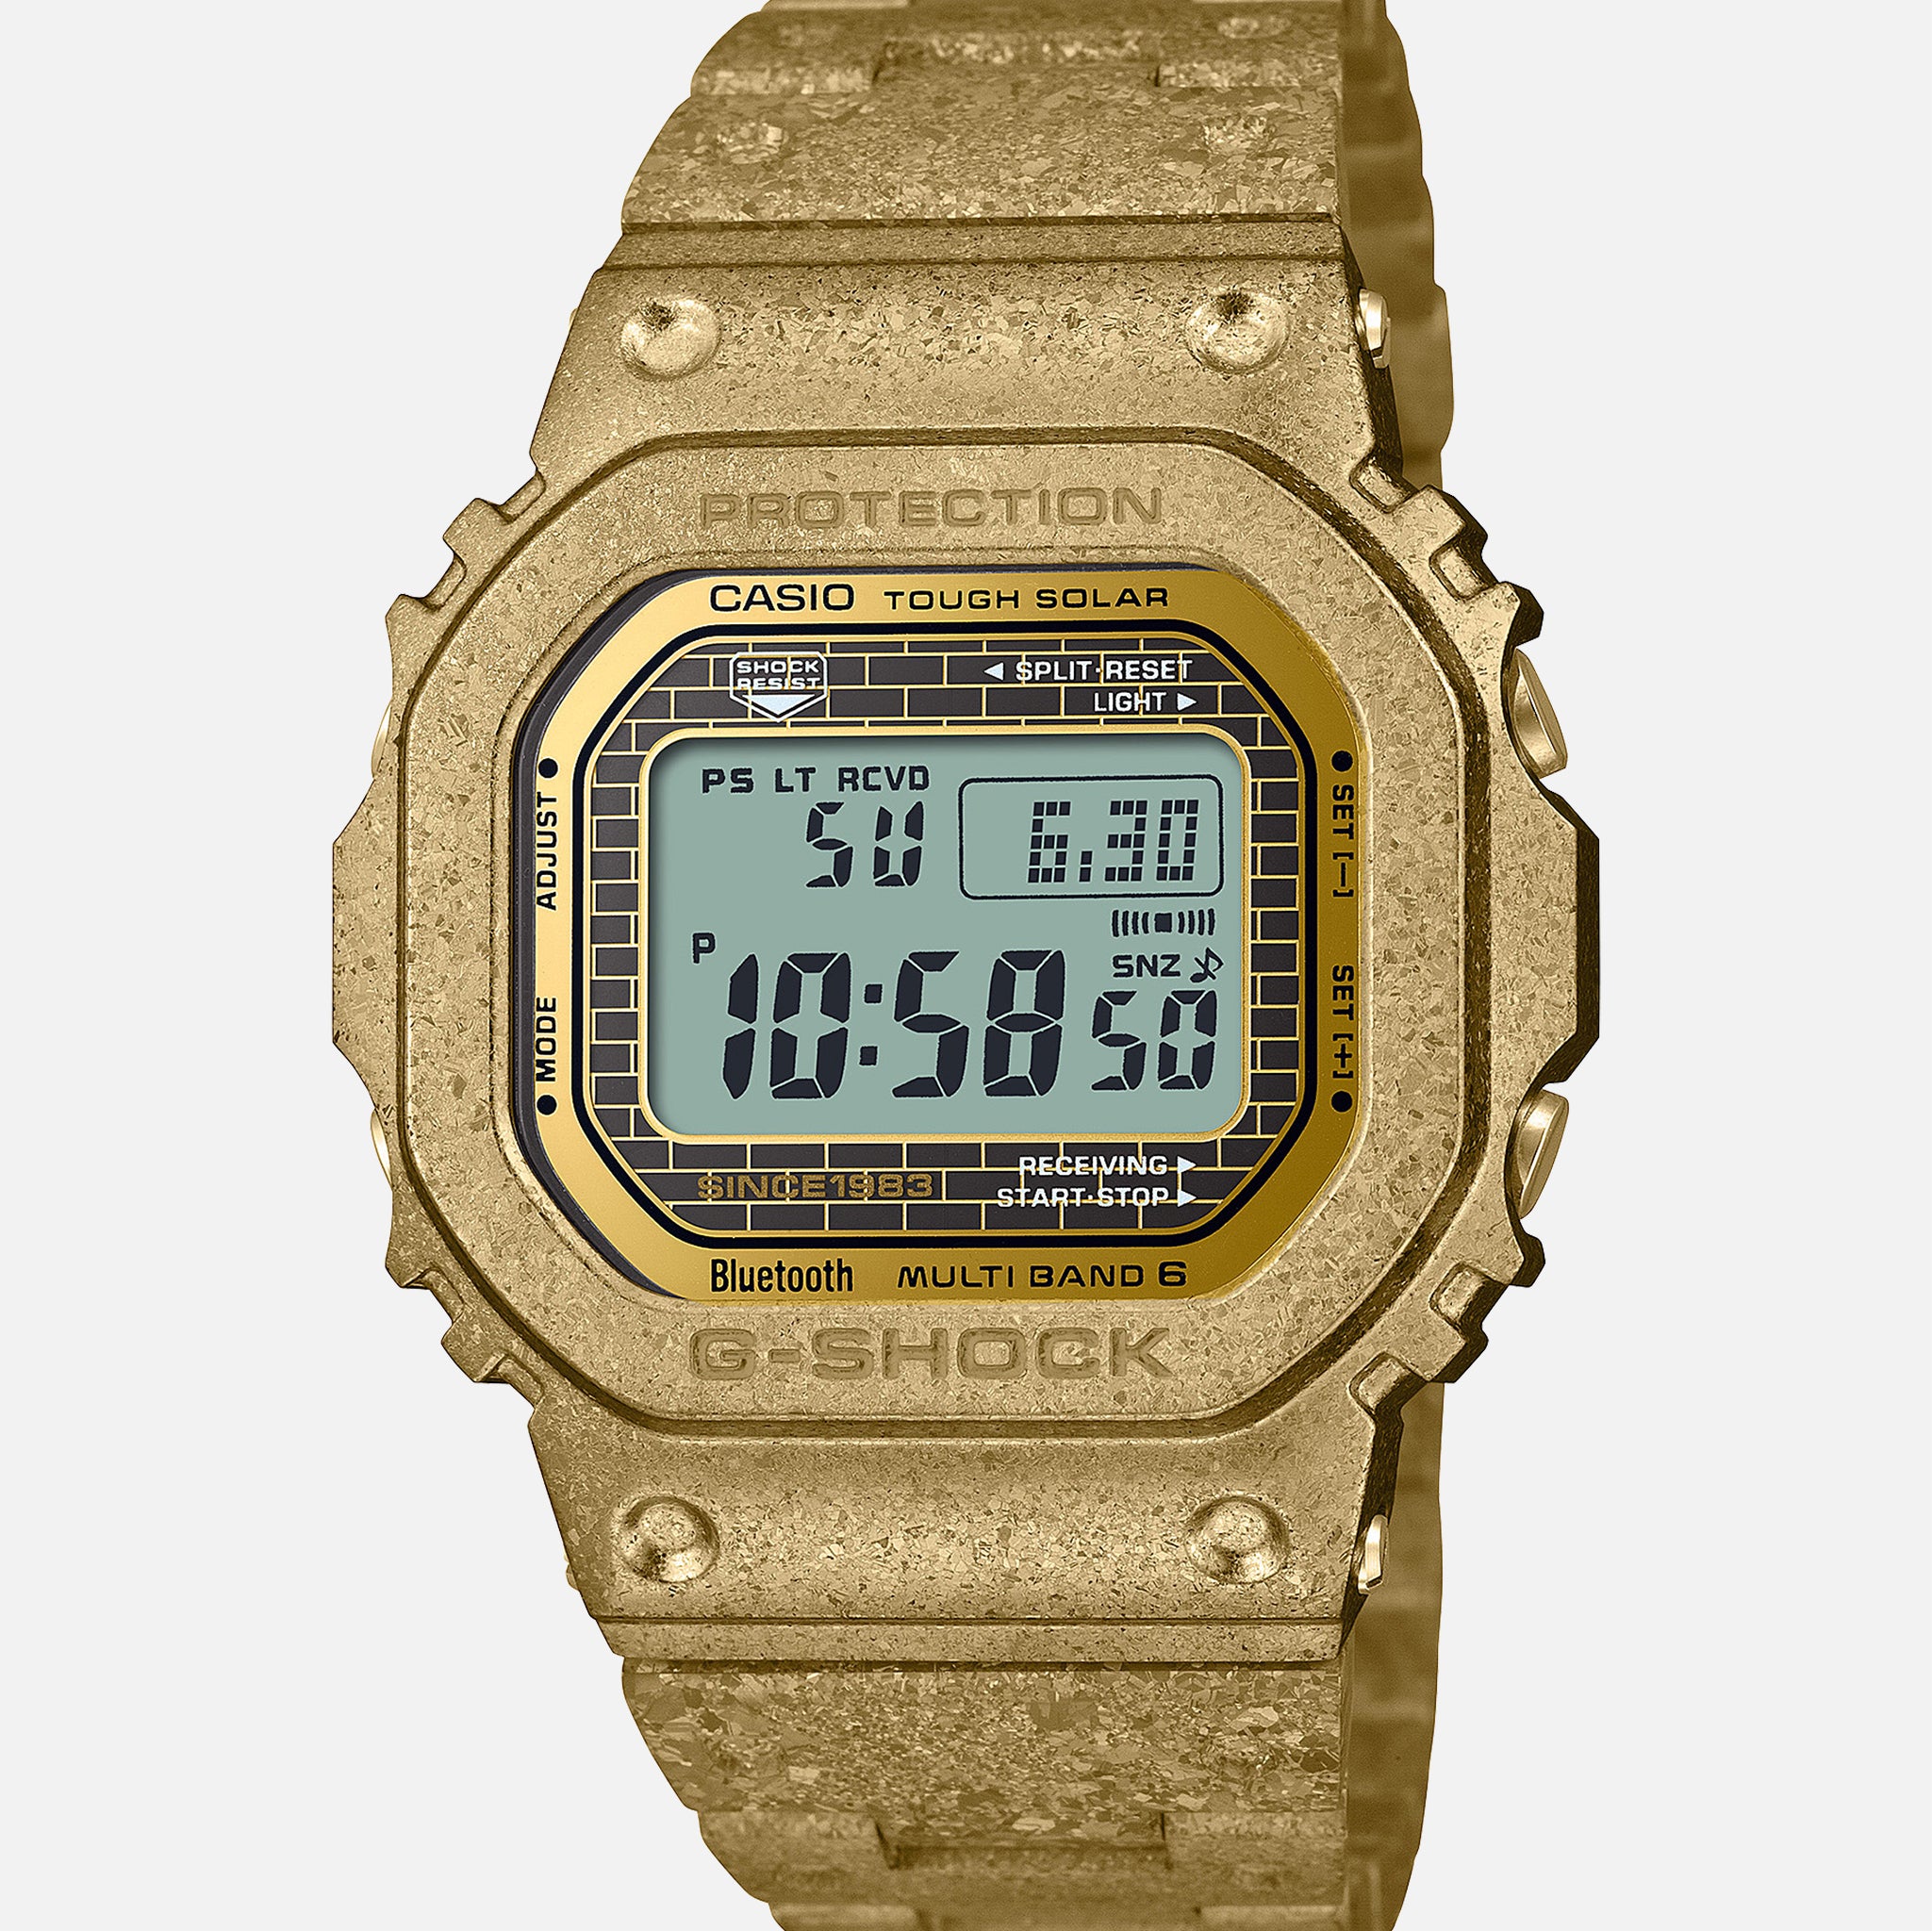 Image of G-SHOCK 'Recrystallized Full Metal' 40th Anniversary Limited Edition